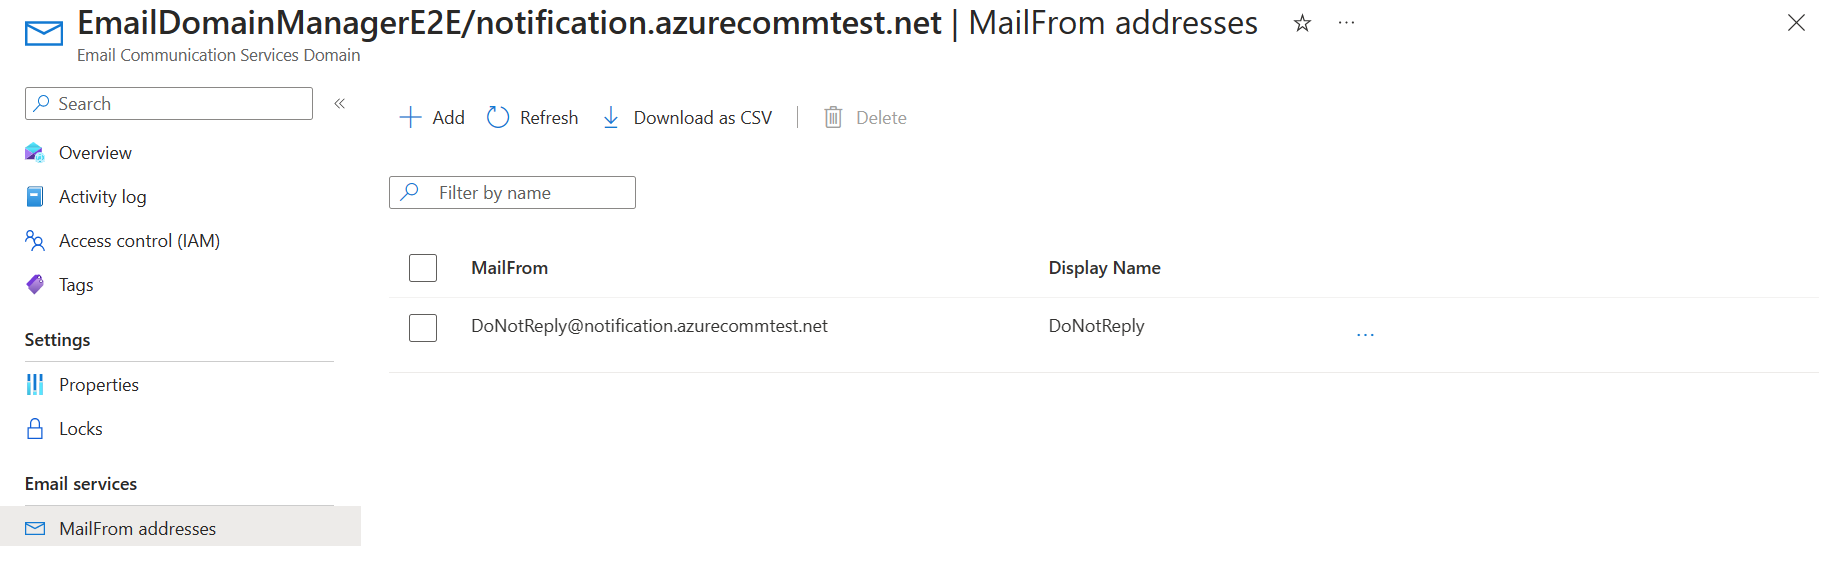 Screenshot that shows MailFrom addresses list after deletion.